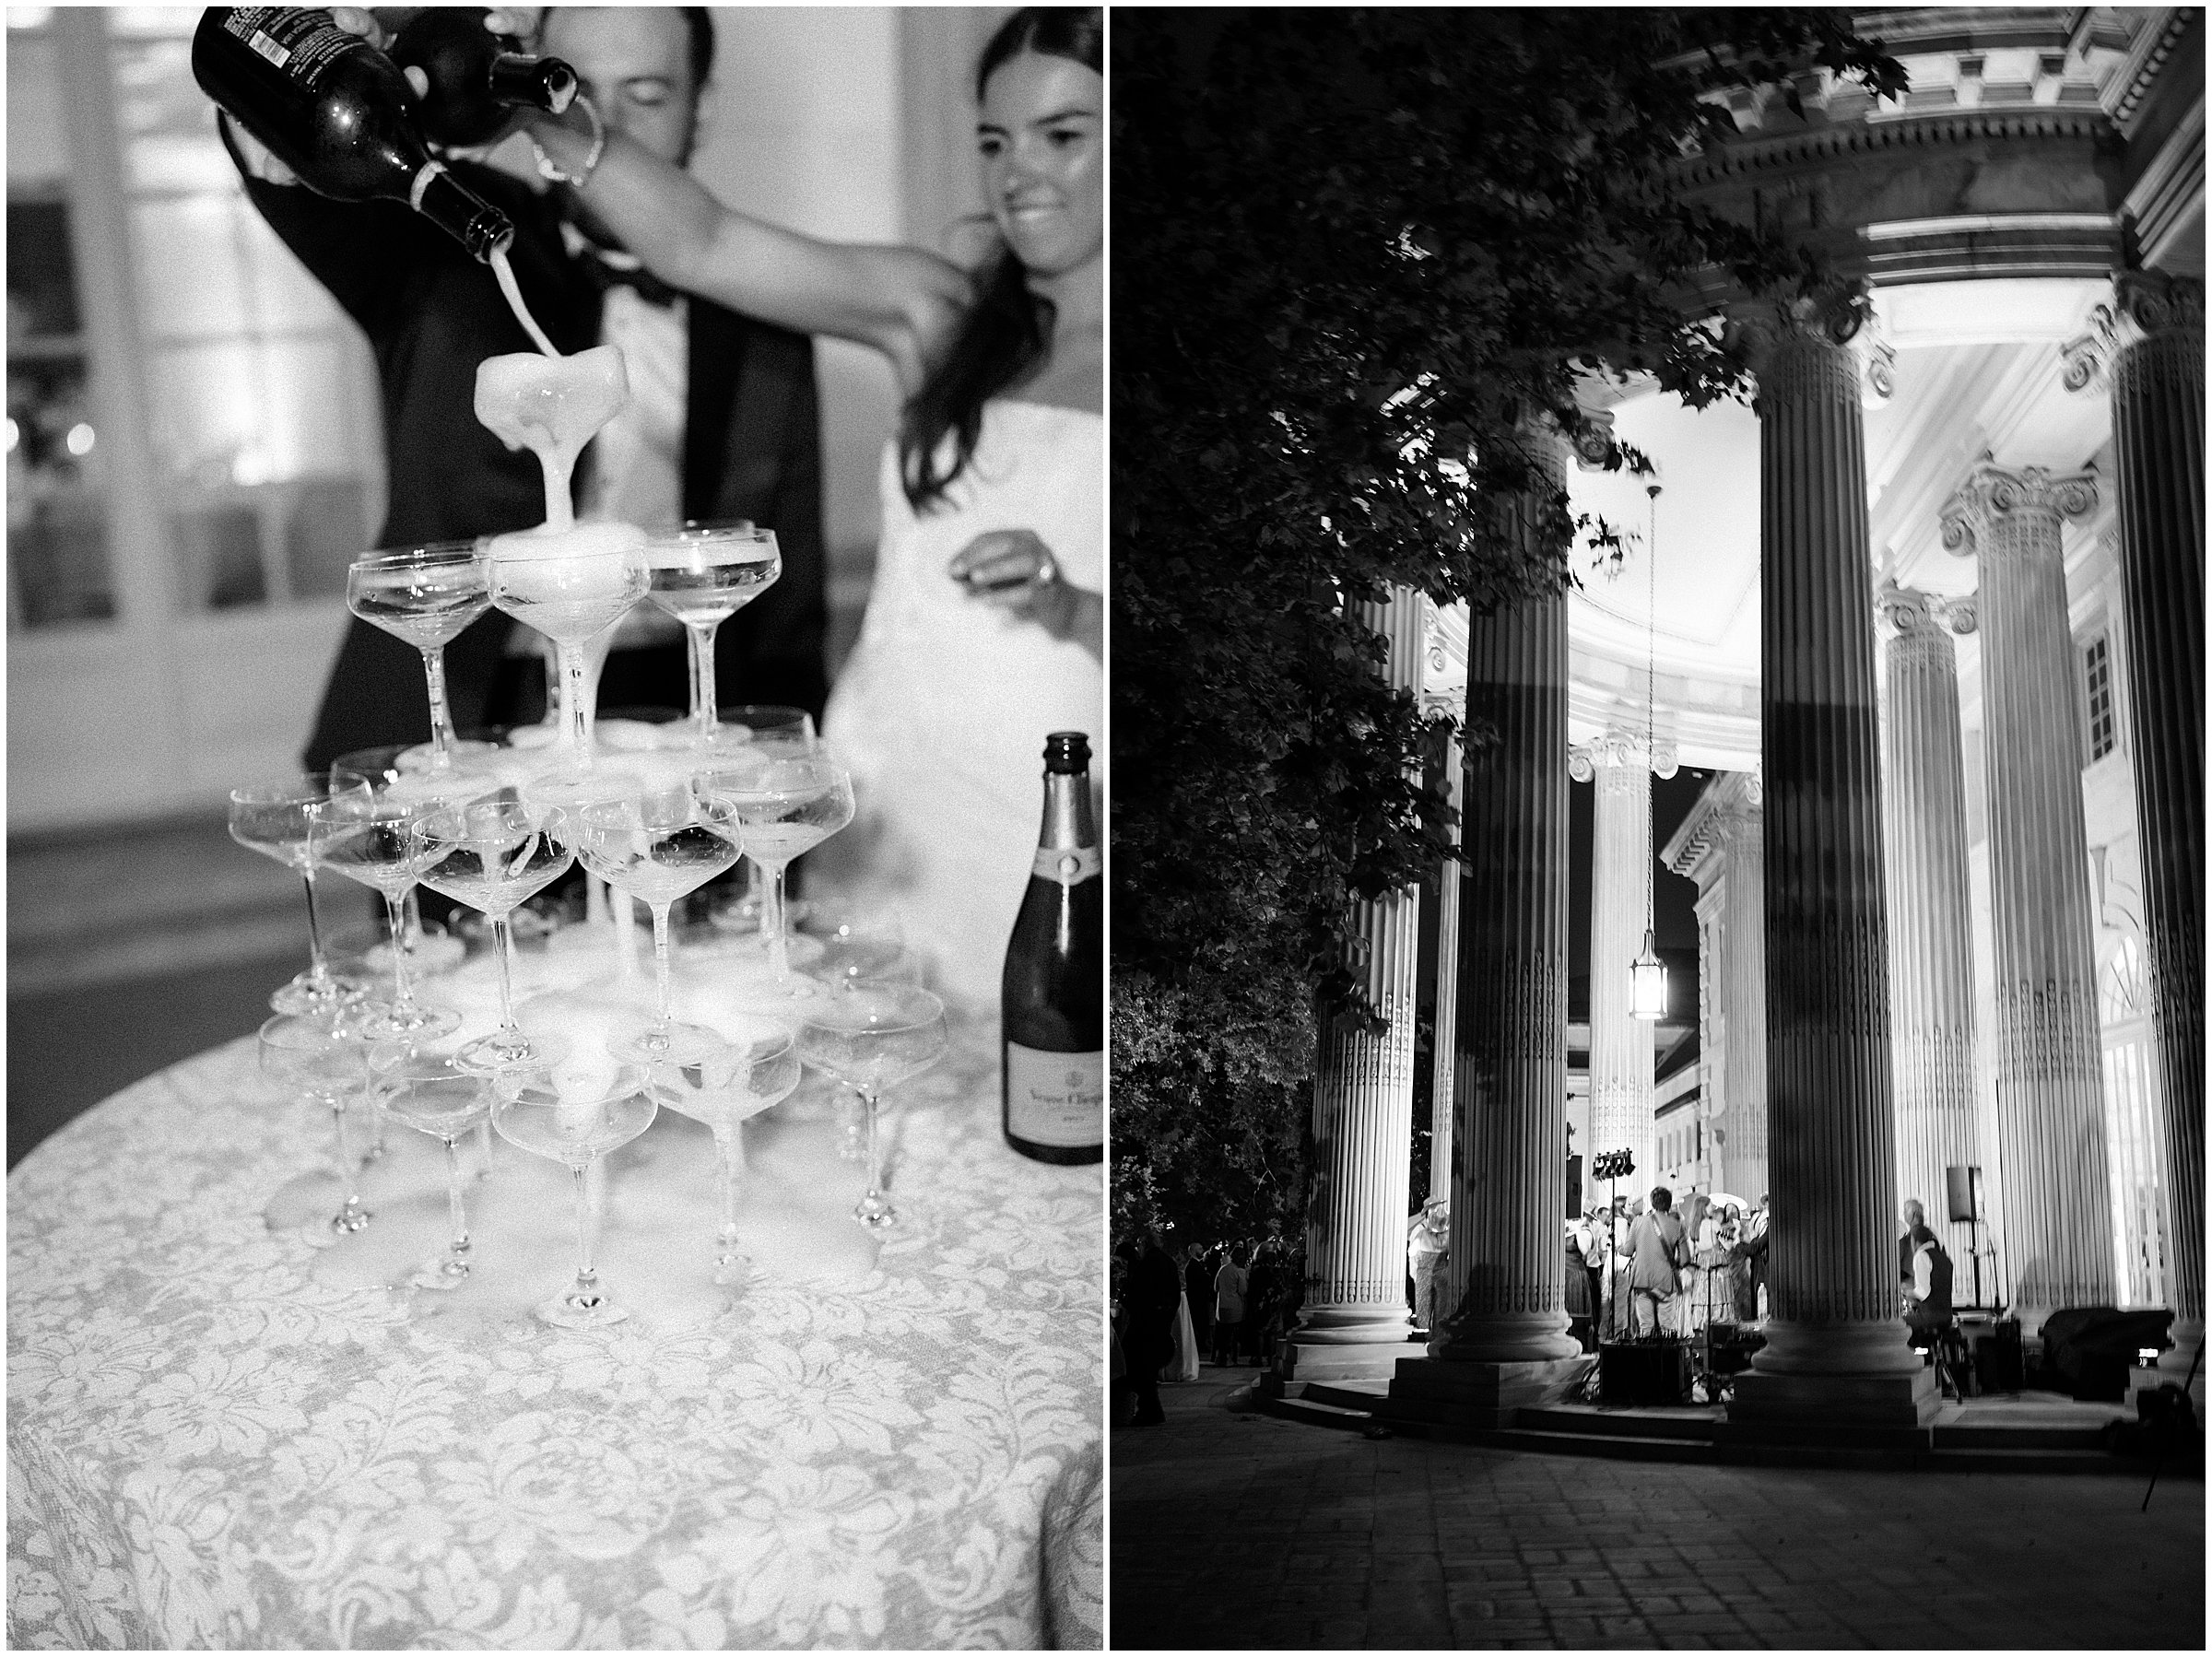 Champagne tower at DAR Constitution Hall wedding reception